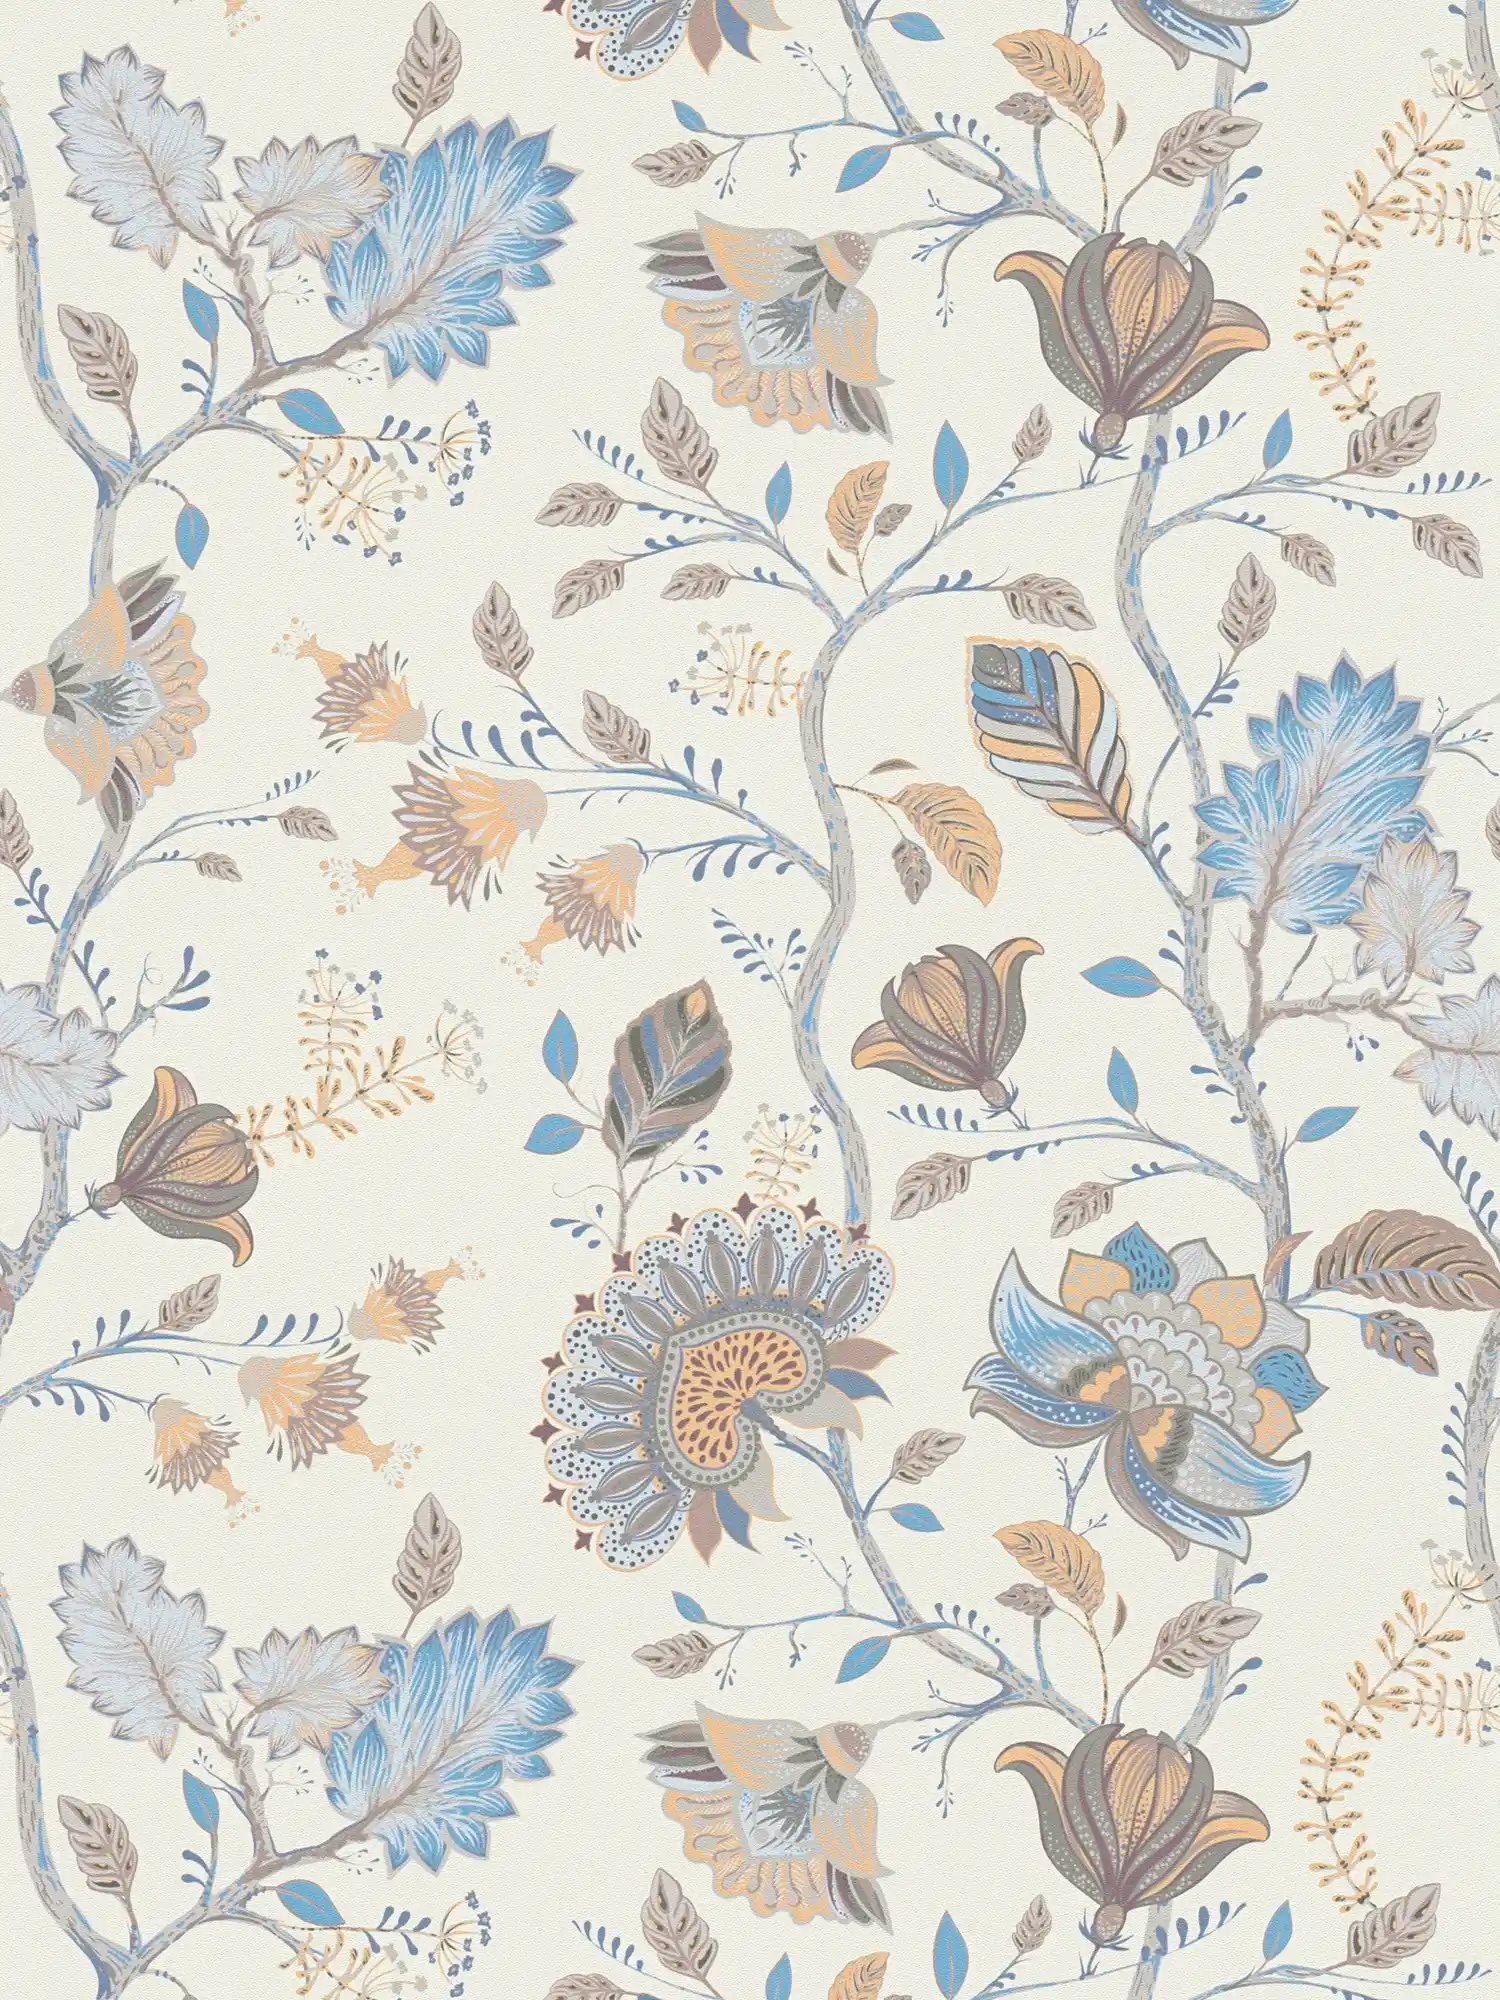 Non-woven wallpaper with floral pattern - blue, cream, grey
